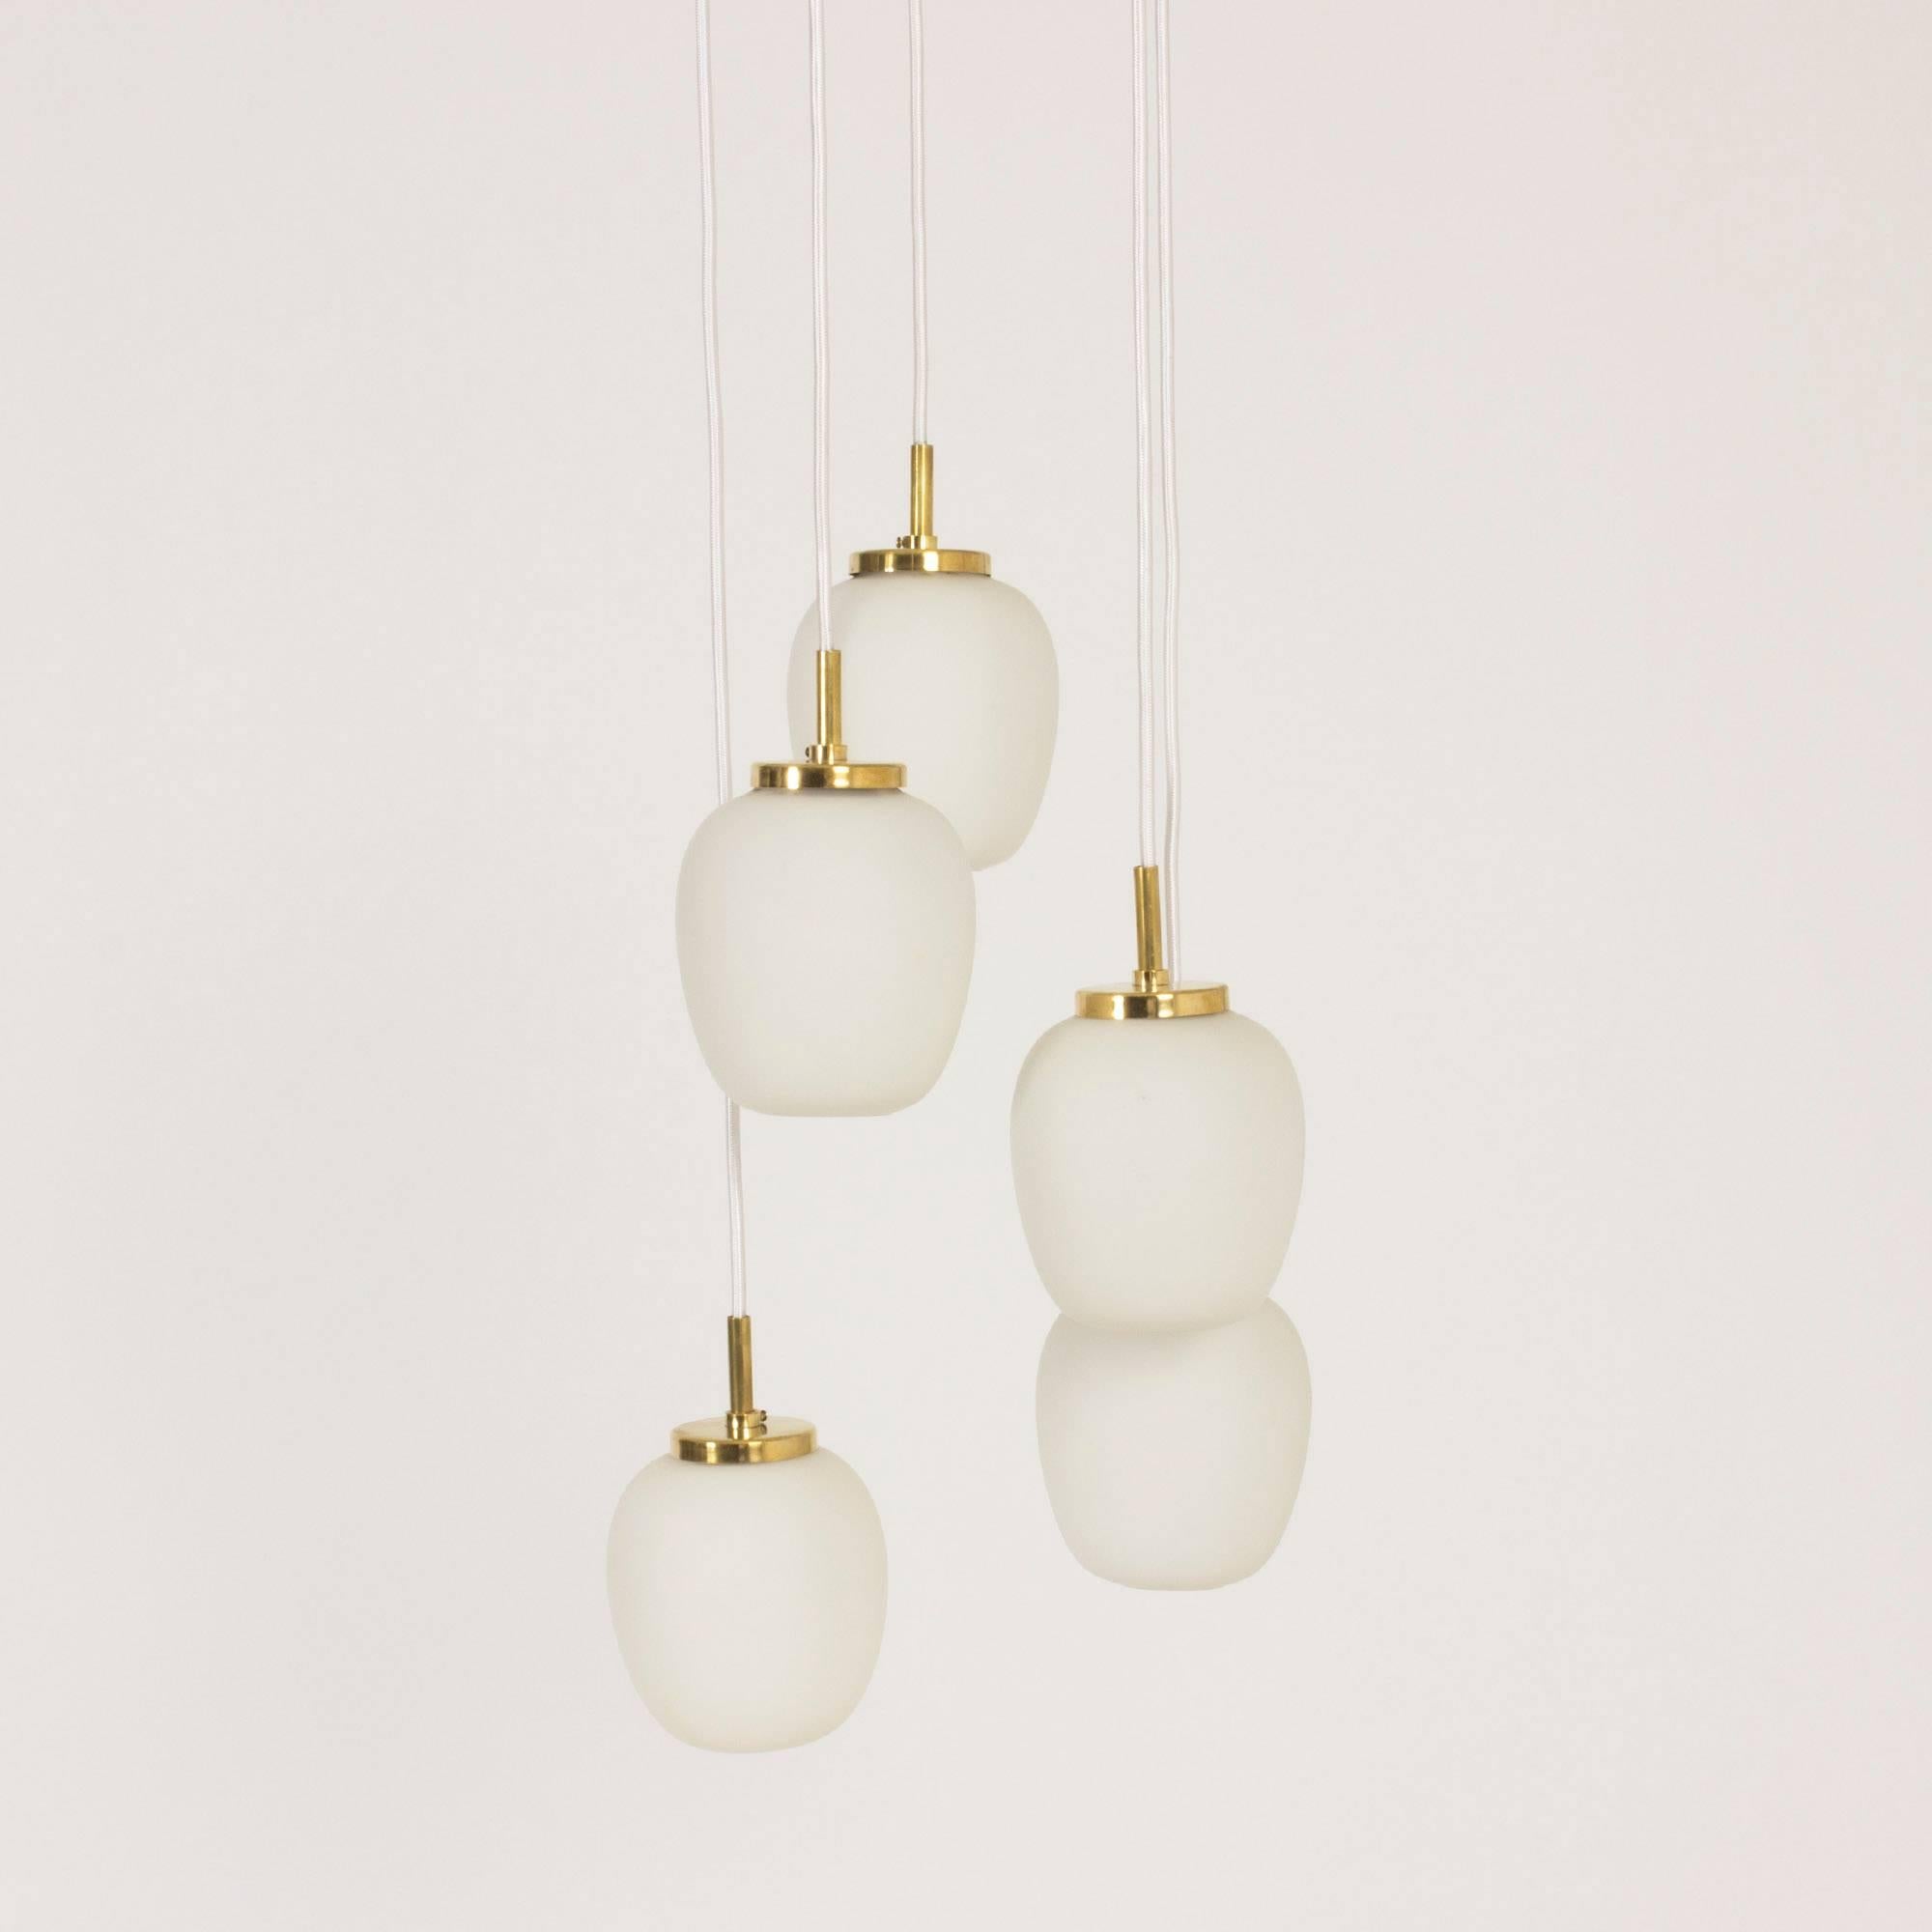 Lovely pendant lamp with five opaline glass shades suspended from a brass ceiling canopy with arms for the five cords. White textile cords.